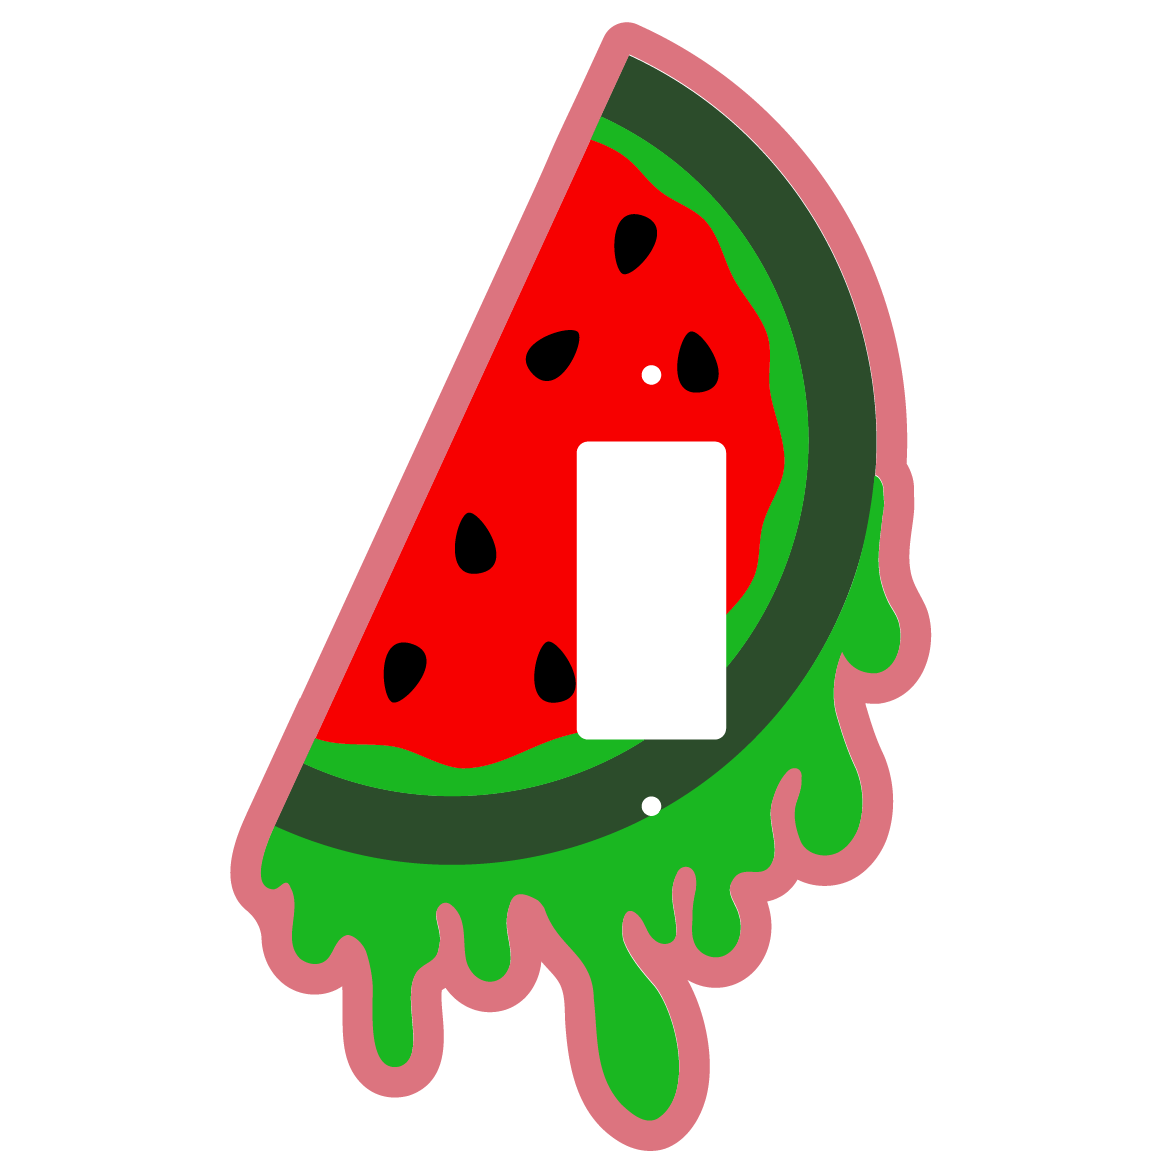 The Watermelon Slice Light Switch Cover